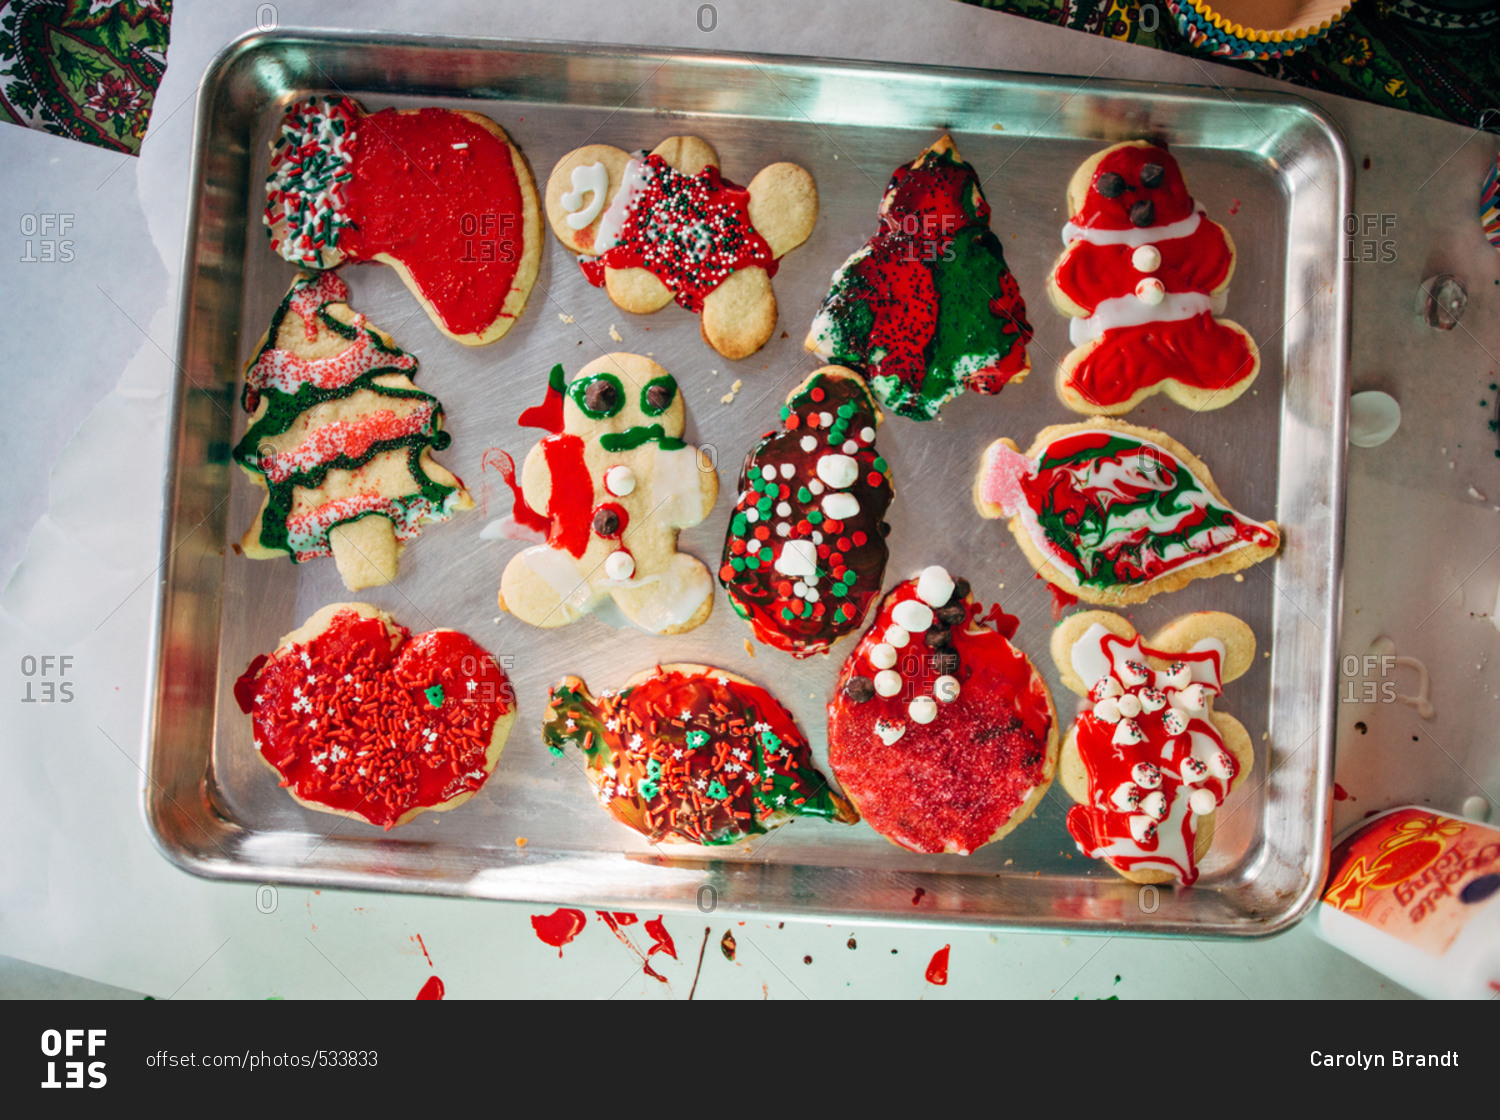 Assortment of home baked holiday cookies decorated by a child